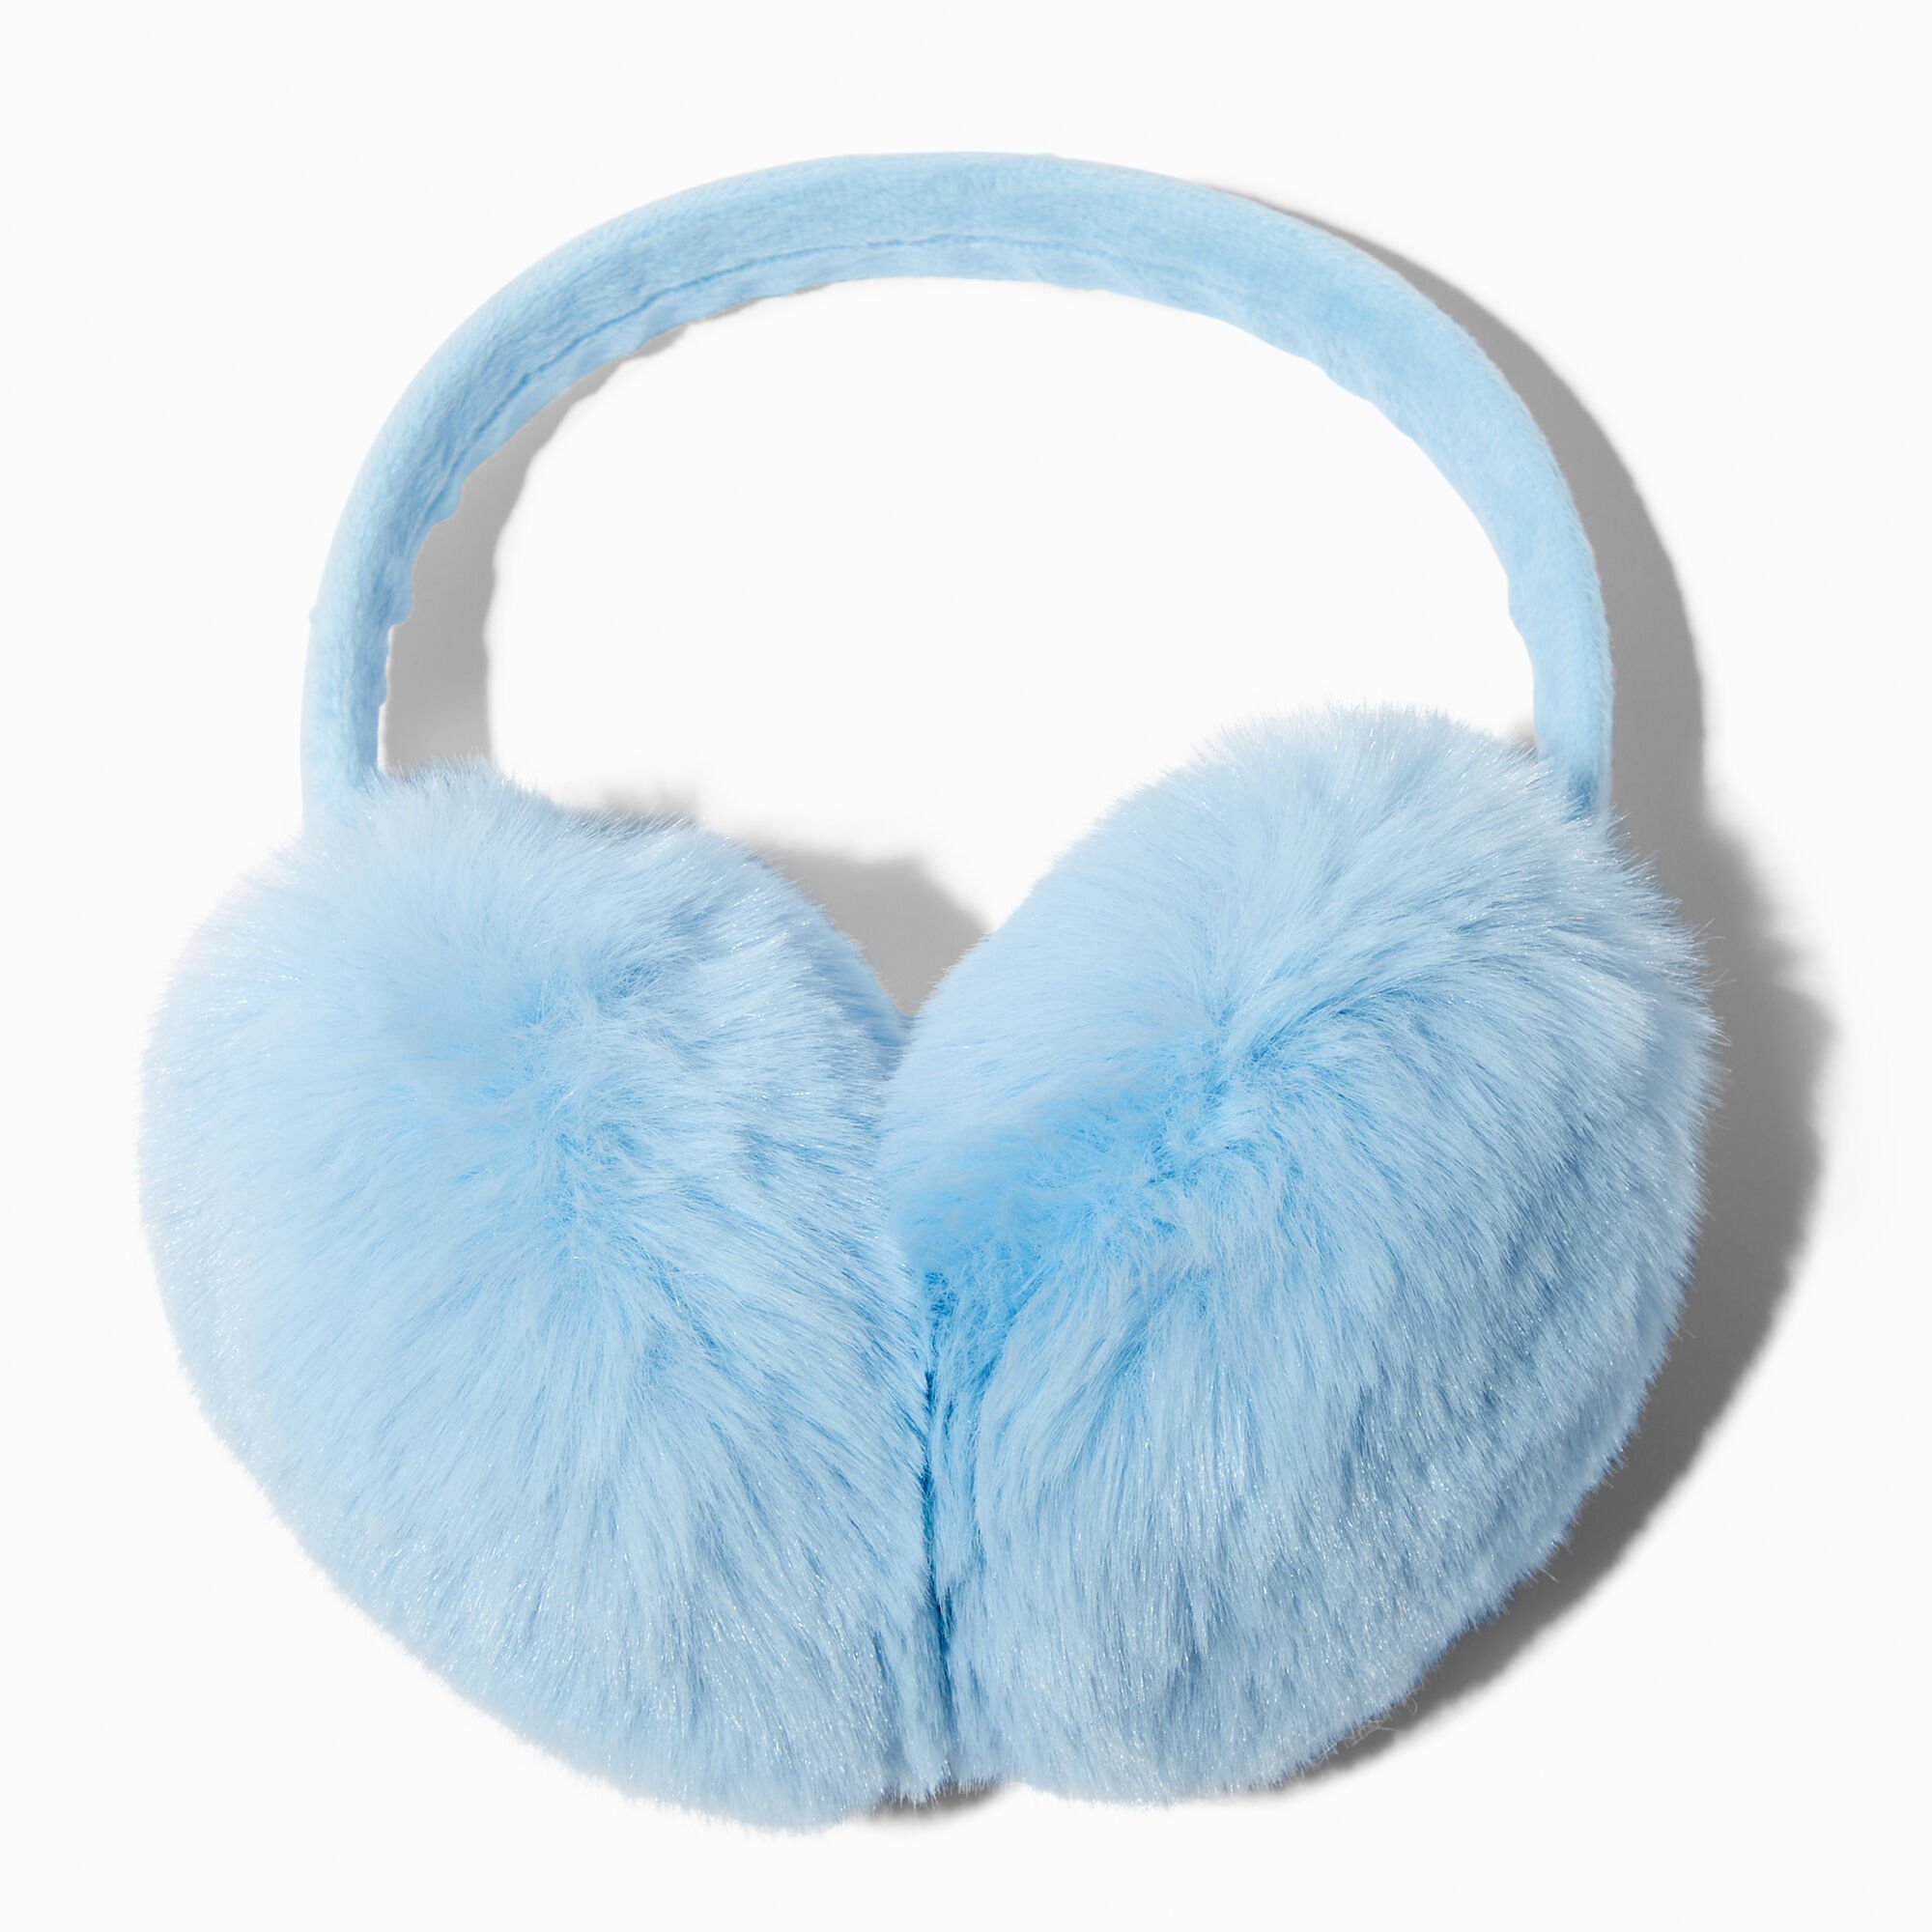 View Claires Furry Earmuffs Blue information